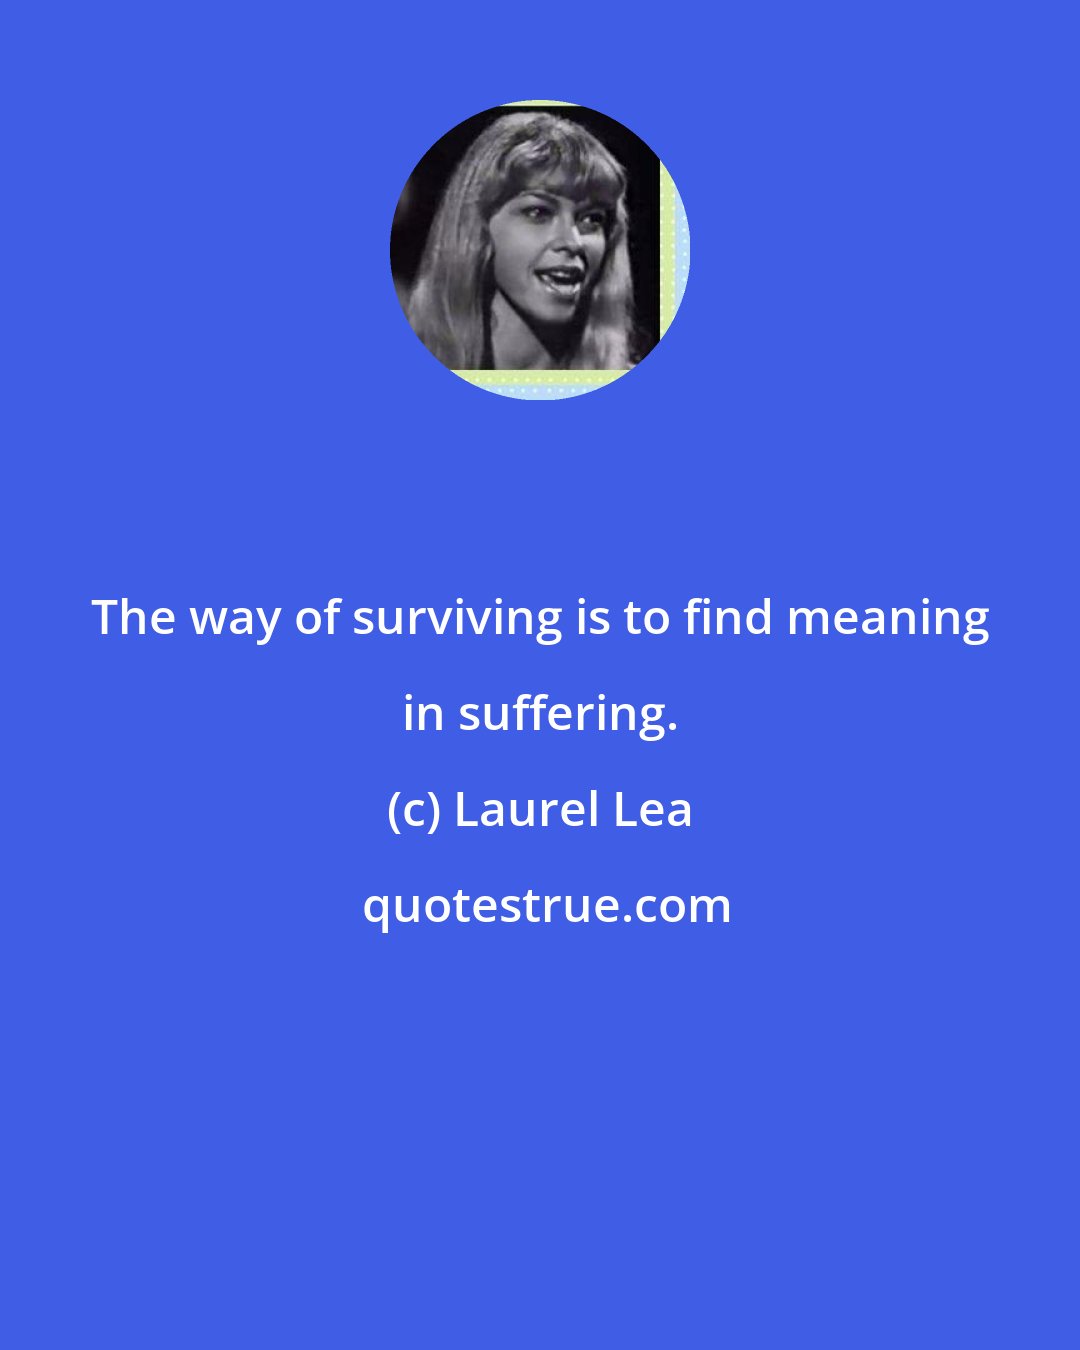 Laurel Lea: The way of surviving is to find meaning in suffering.